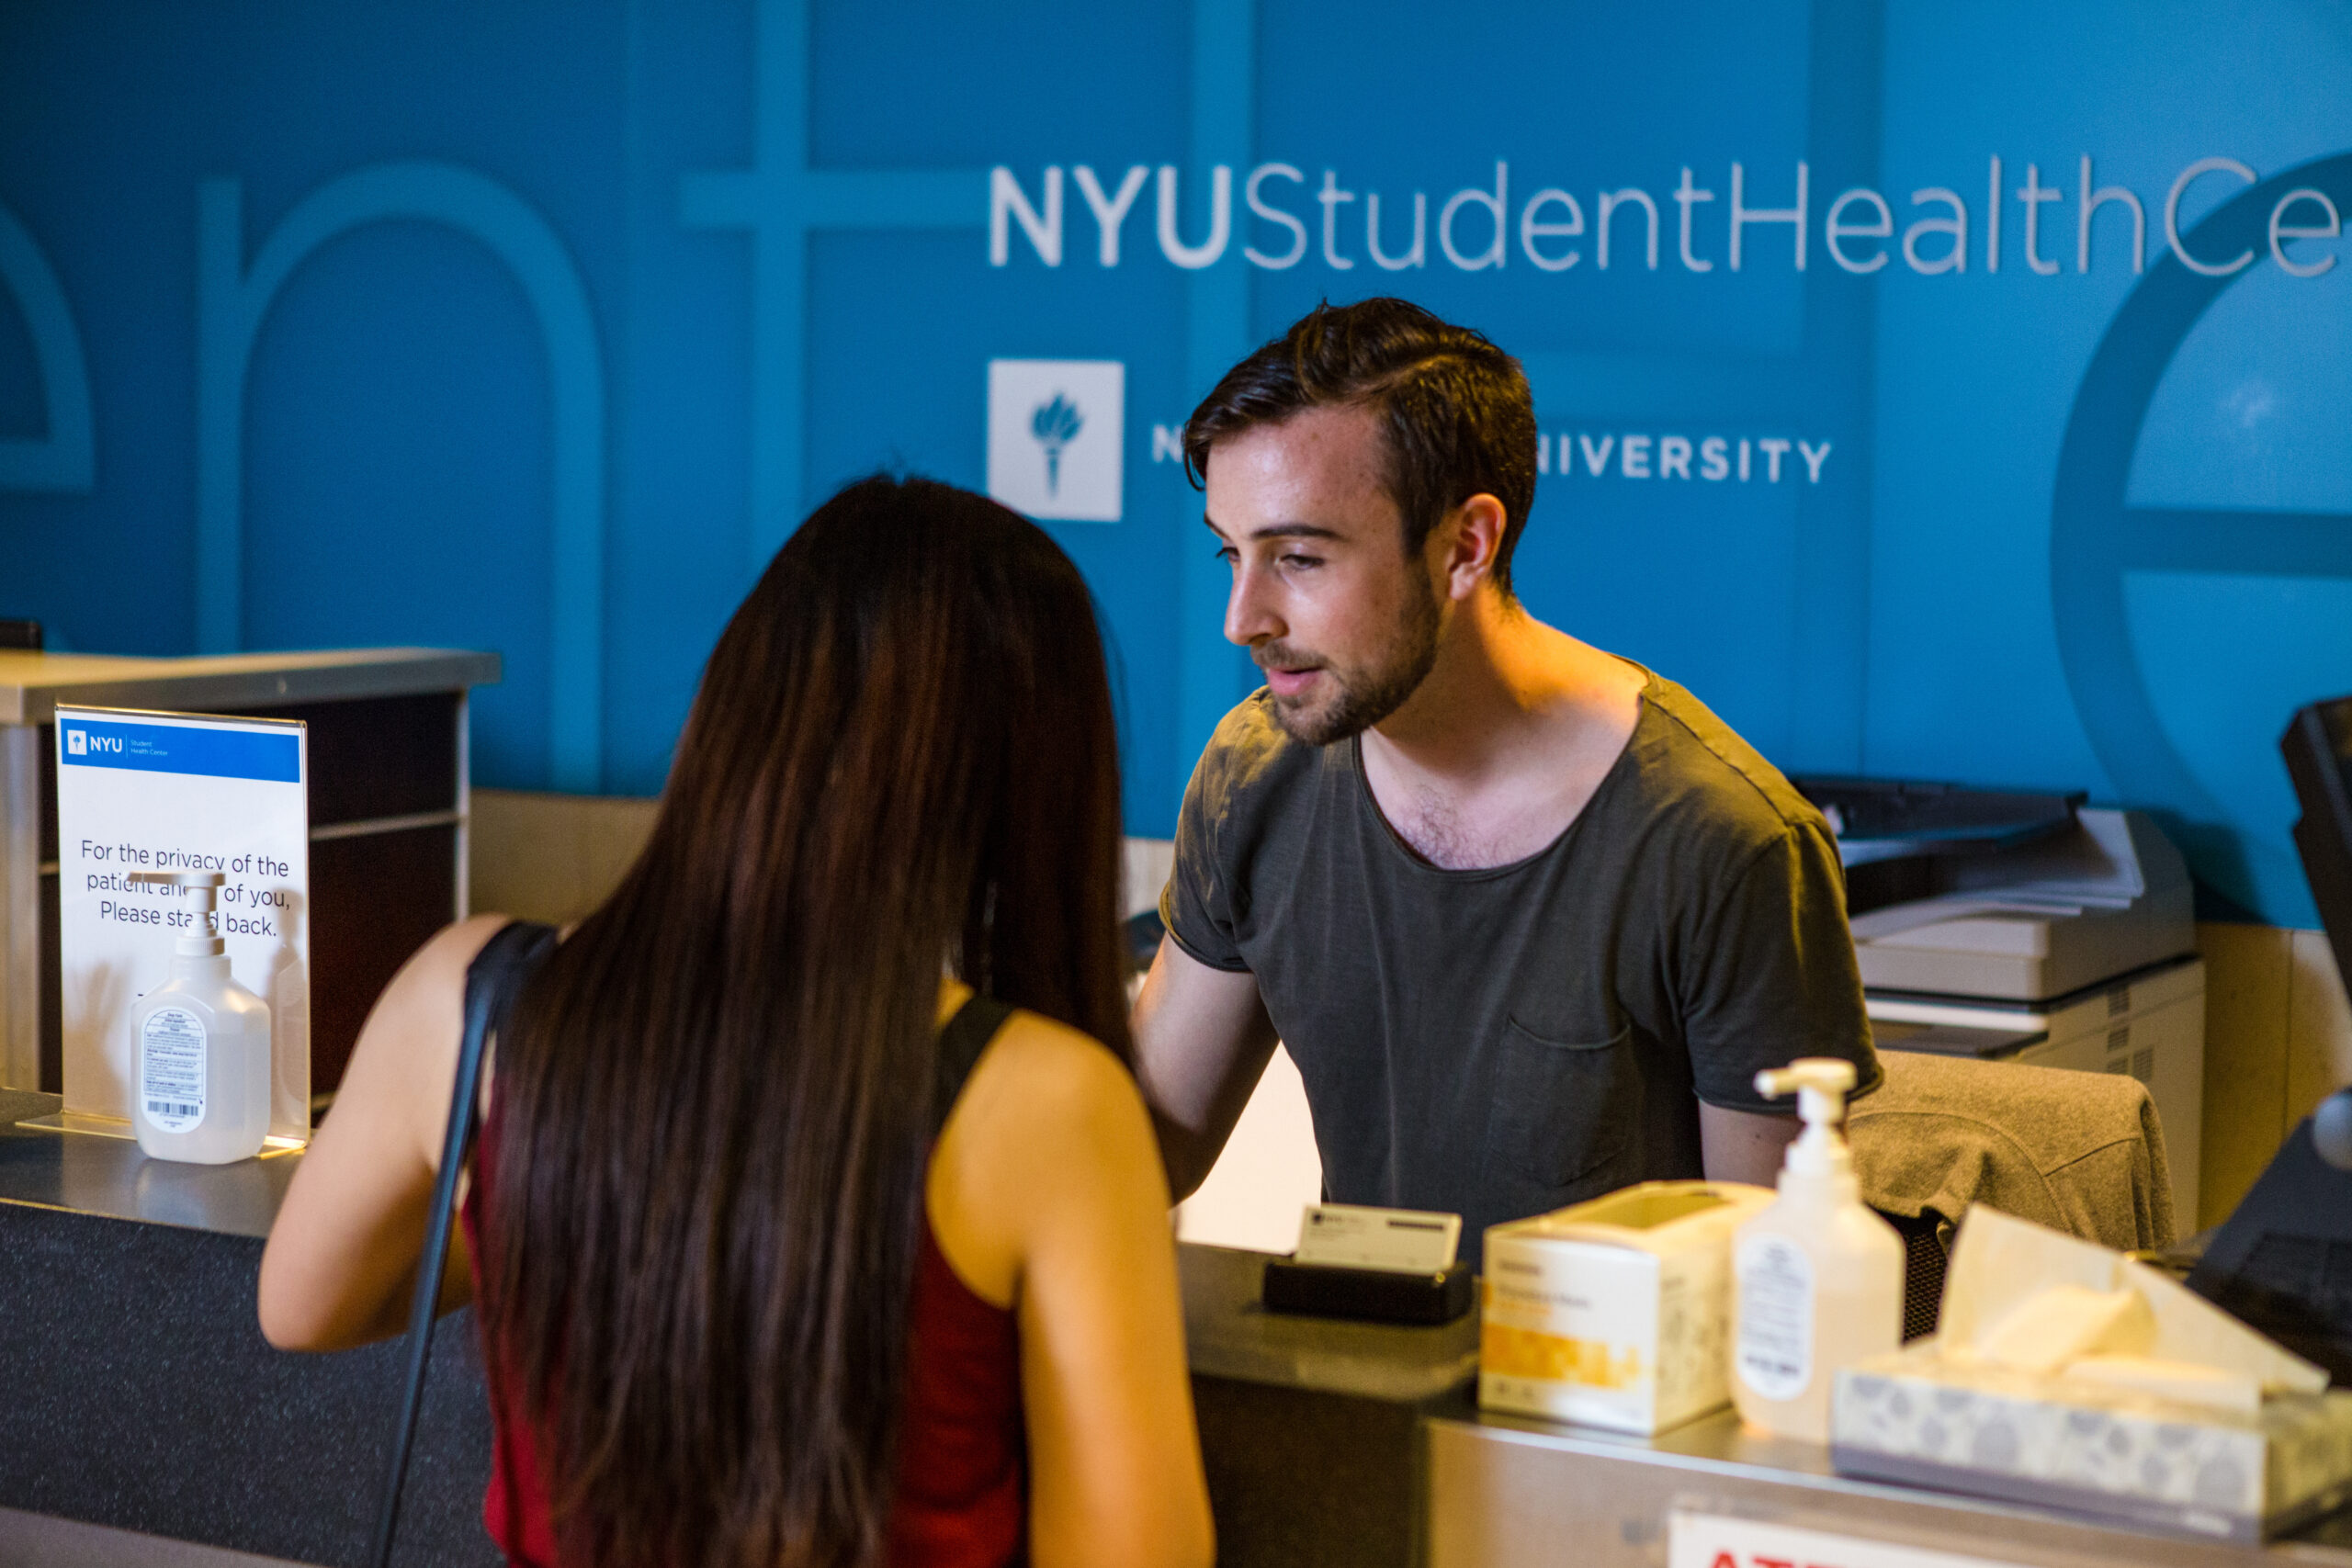 A student receptionist helping a visitor at the NYU Student Health Center.